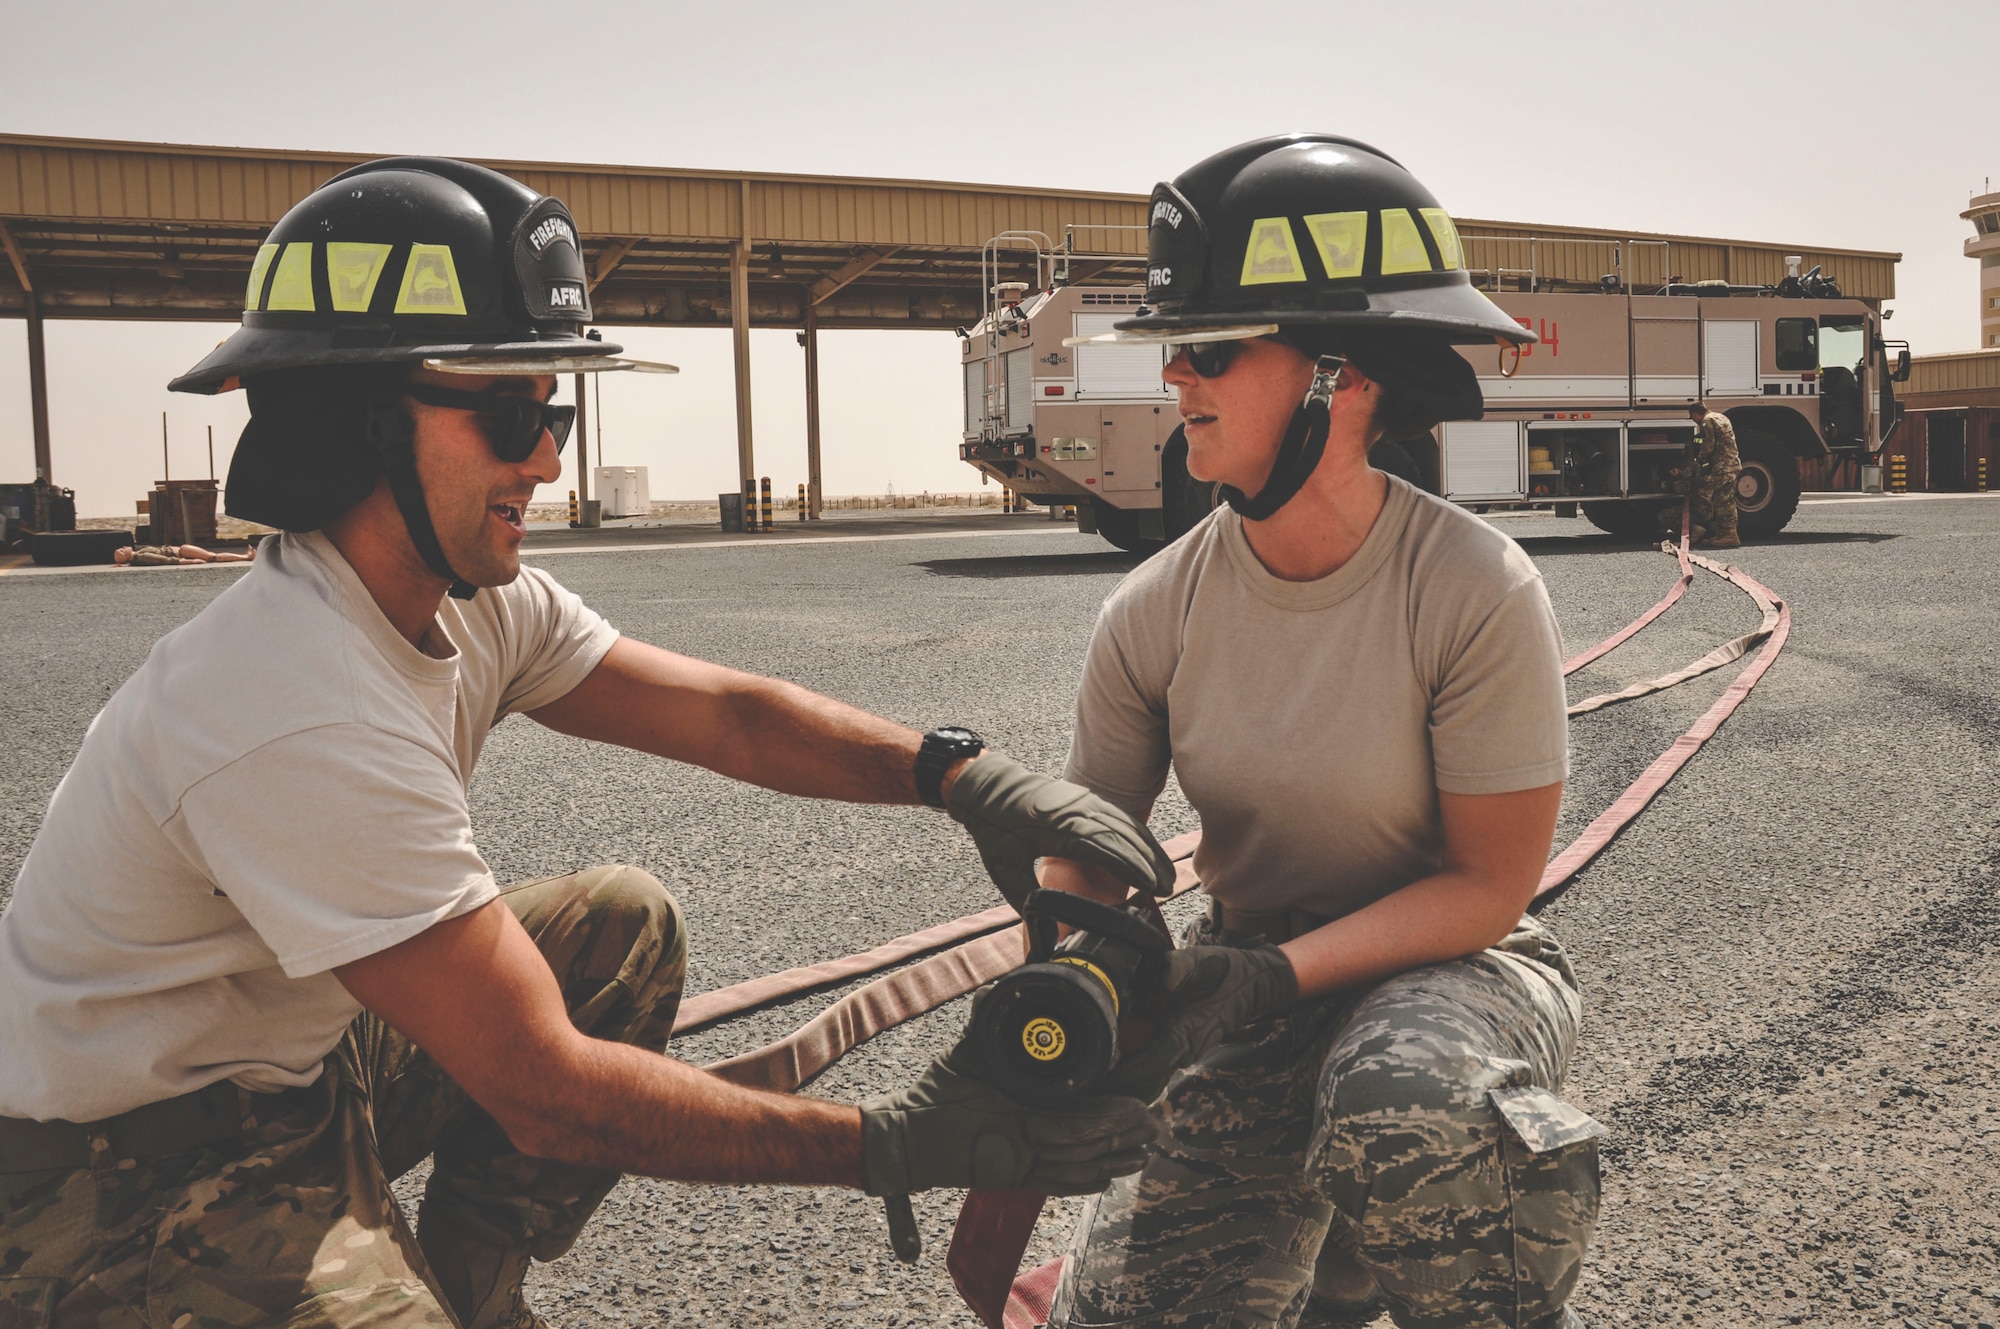 Senior Airman Kevin Angelesco a fire fighter assigned to the 386th Expeditionary Civil Engineer Squadron, (left) instructs Staff Sgt. Jessica Moore, a mental health technician with the 386th Medical Group on fire hose control during a mental health unit familiarization visit at an undisclosed location in southwest Asia, May 30, 2017. Moore regularly conducts unit visits to perform preventative mental health checks. (U.S. Air Force Photo/Master Sgt. Eric M. Sharman)